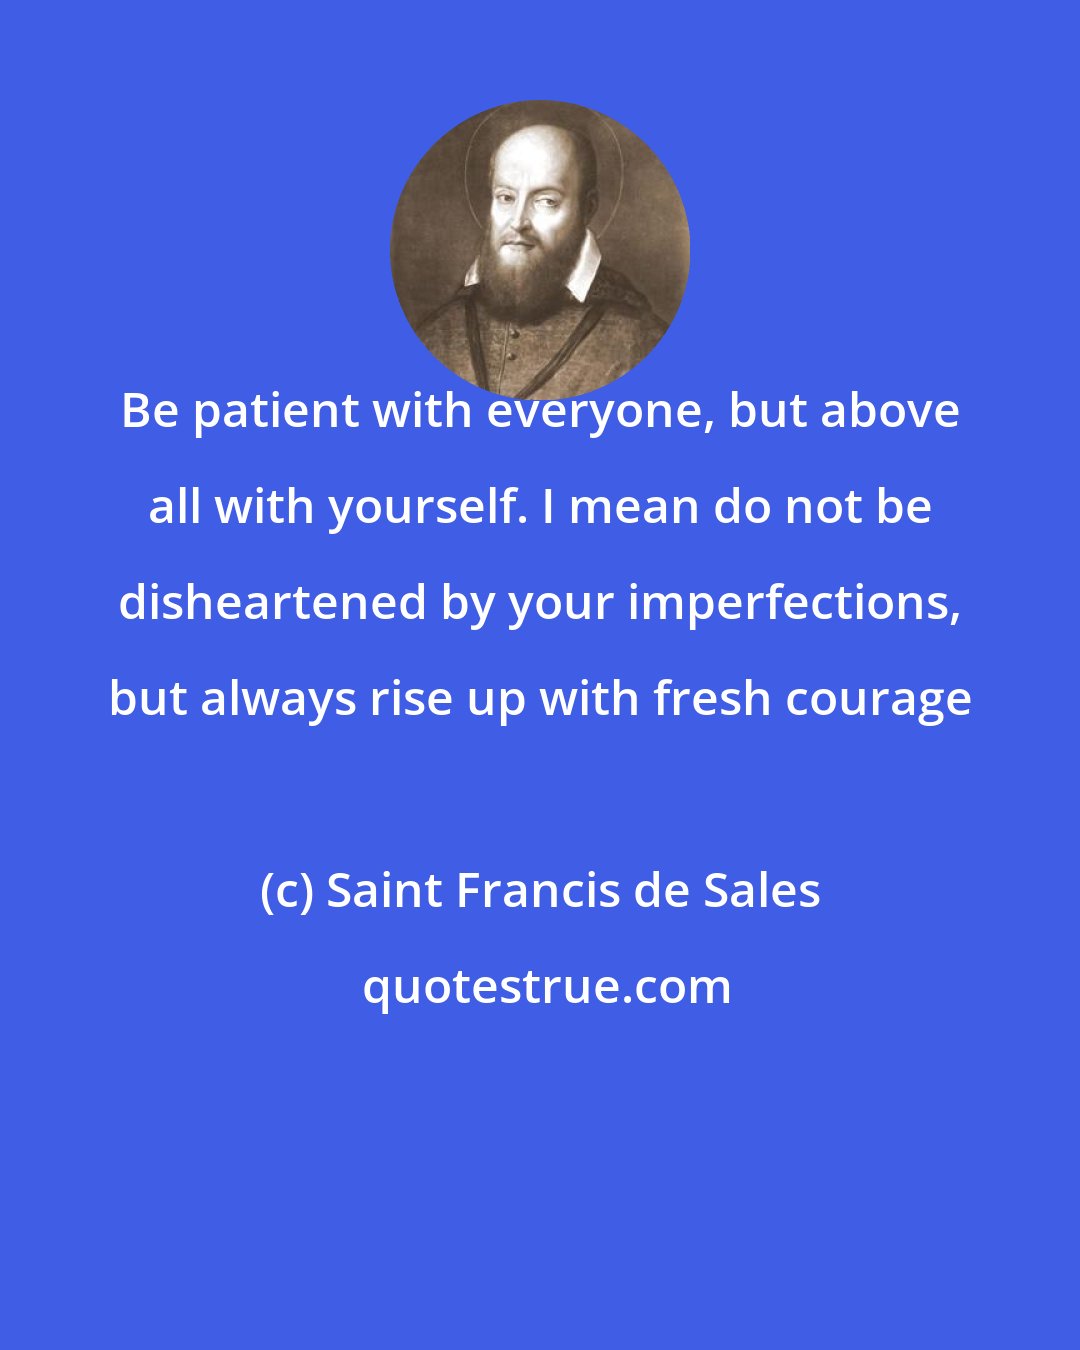 Saint Francis de Sales: Be patient with everyone, but above all with yourself. I mean do not be disheartened by your imperfections, but always rise up with fresh courage